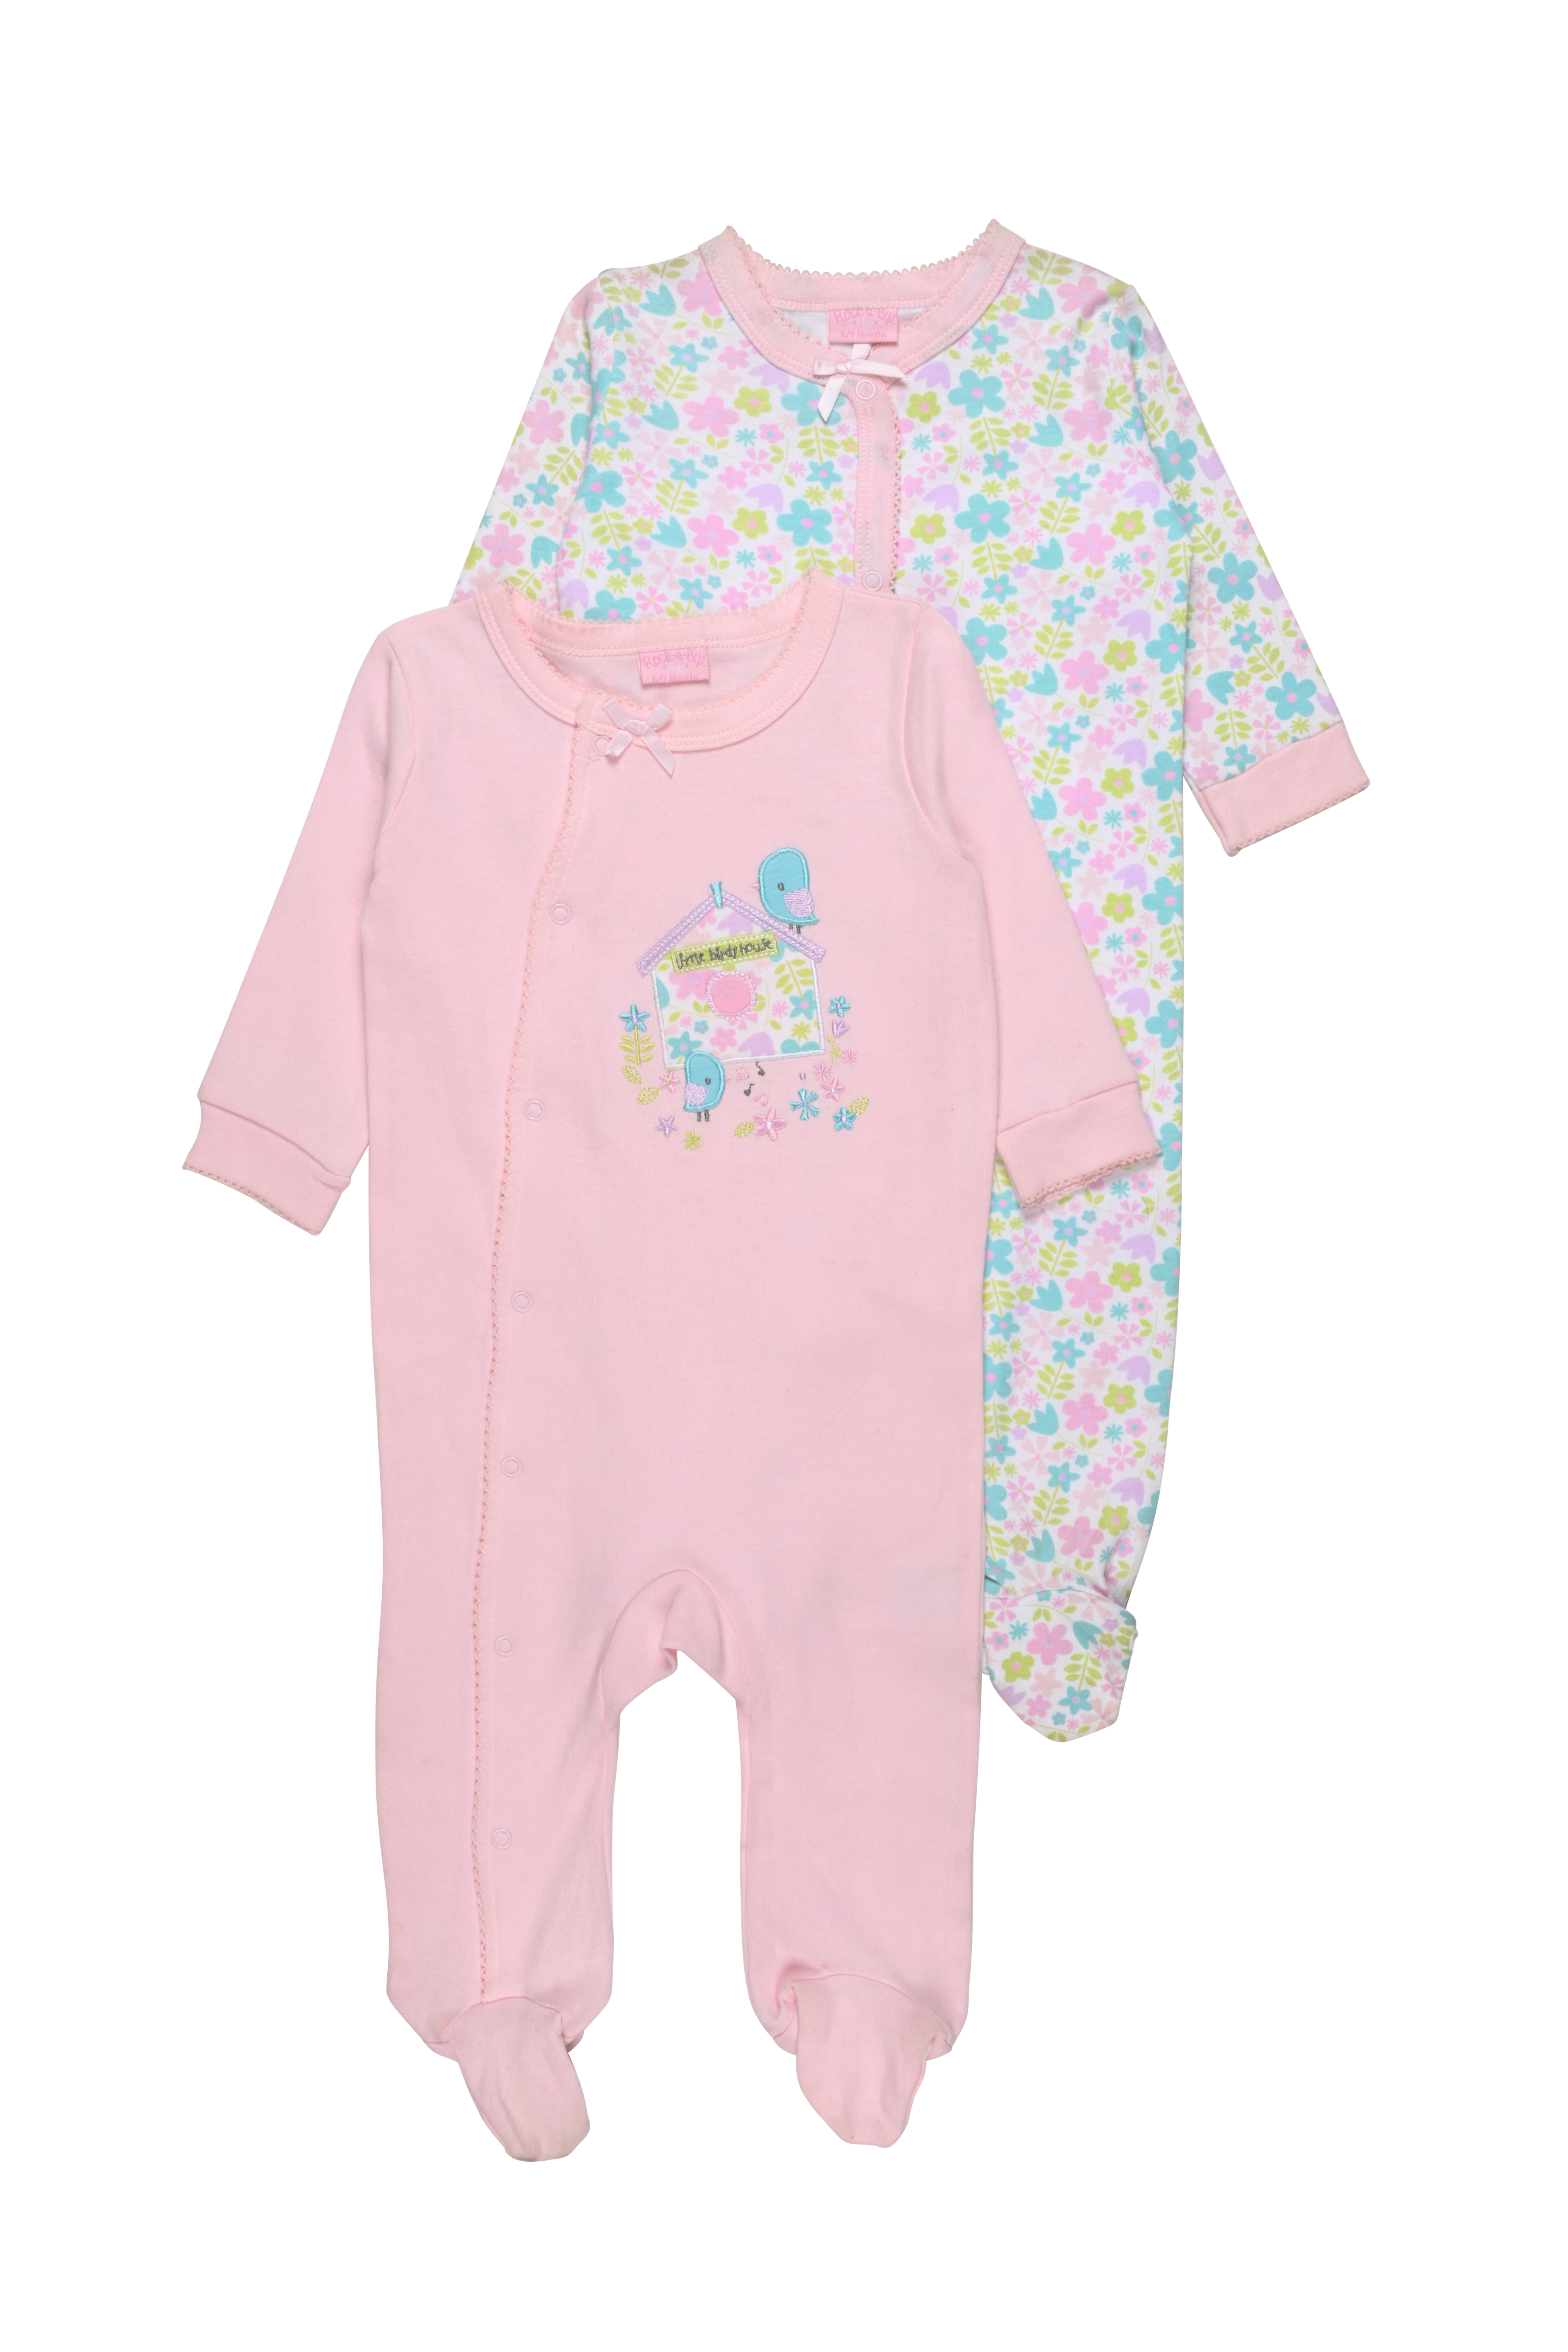 Mothercare | Unisex Full Sleeves Sleepsuit -Pack of 2-Multicolor